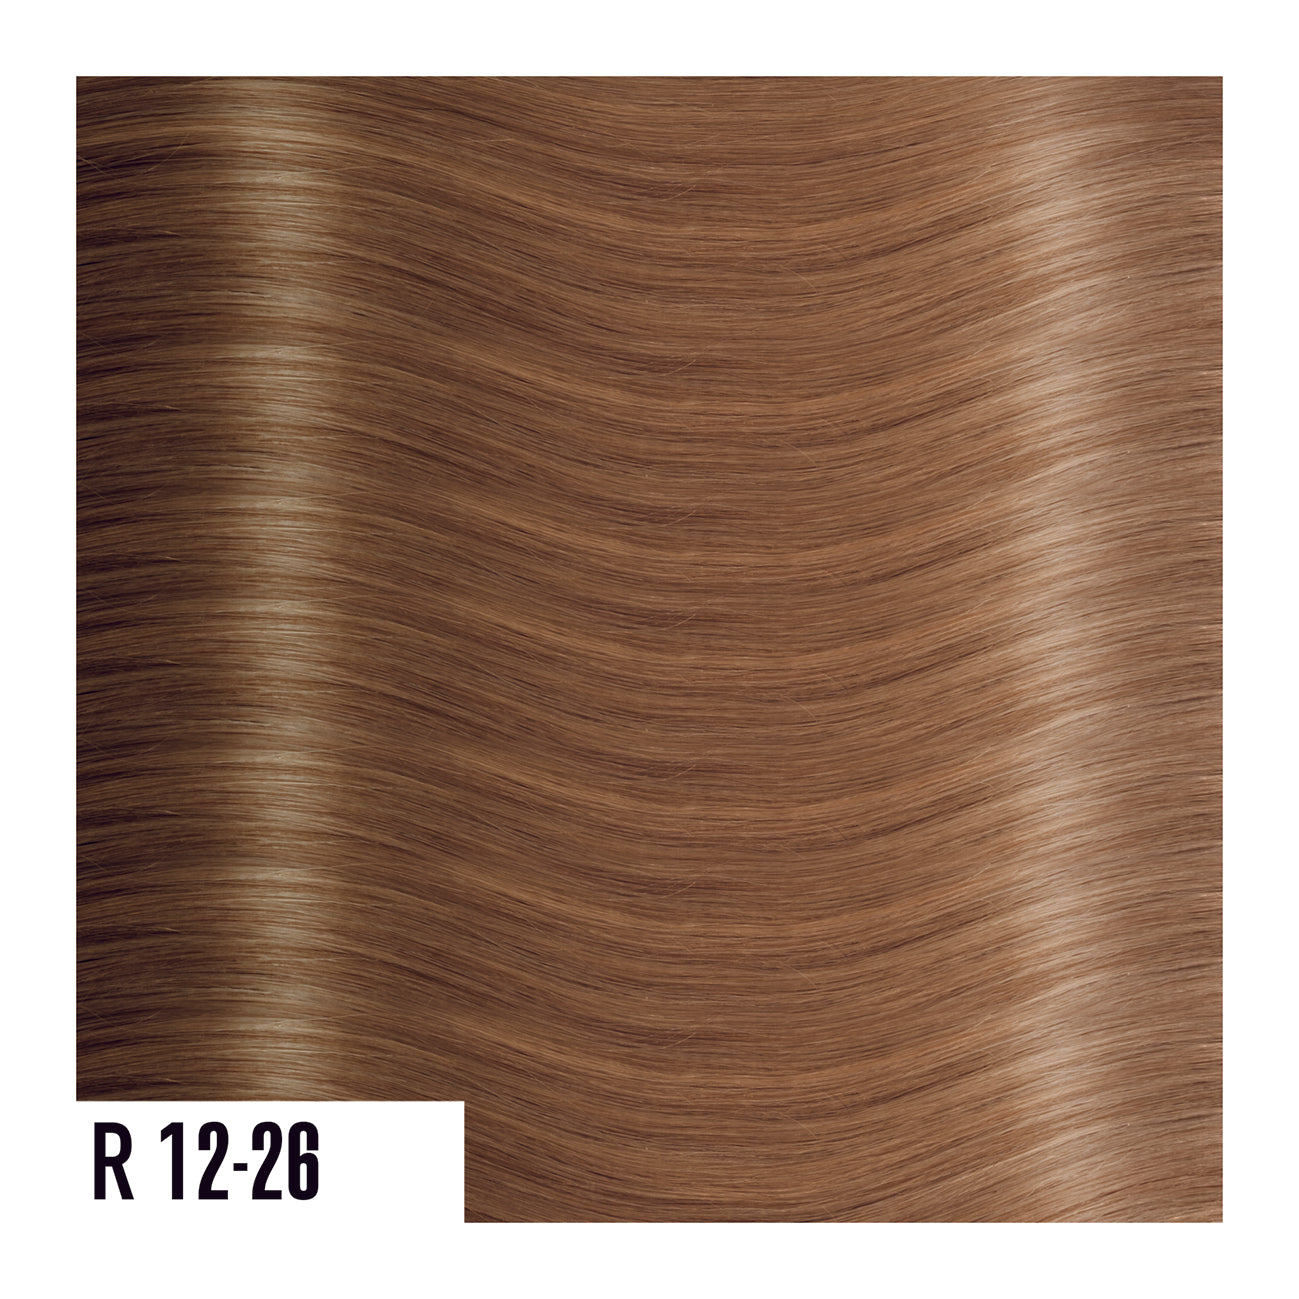 R12-26 - Rooted Prime Tape In Light Medium Brown Into  Warm Rose Blonde - Ombre colors are a beautiful gradual blend of 3 colors with darker roots and lighter ends. 